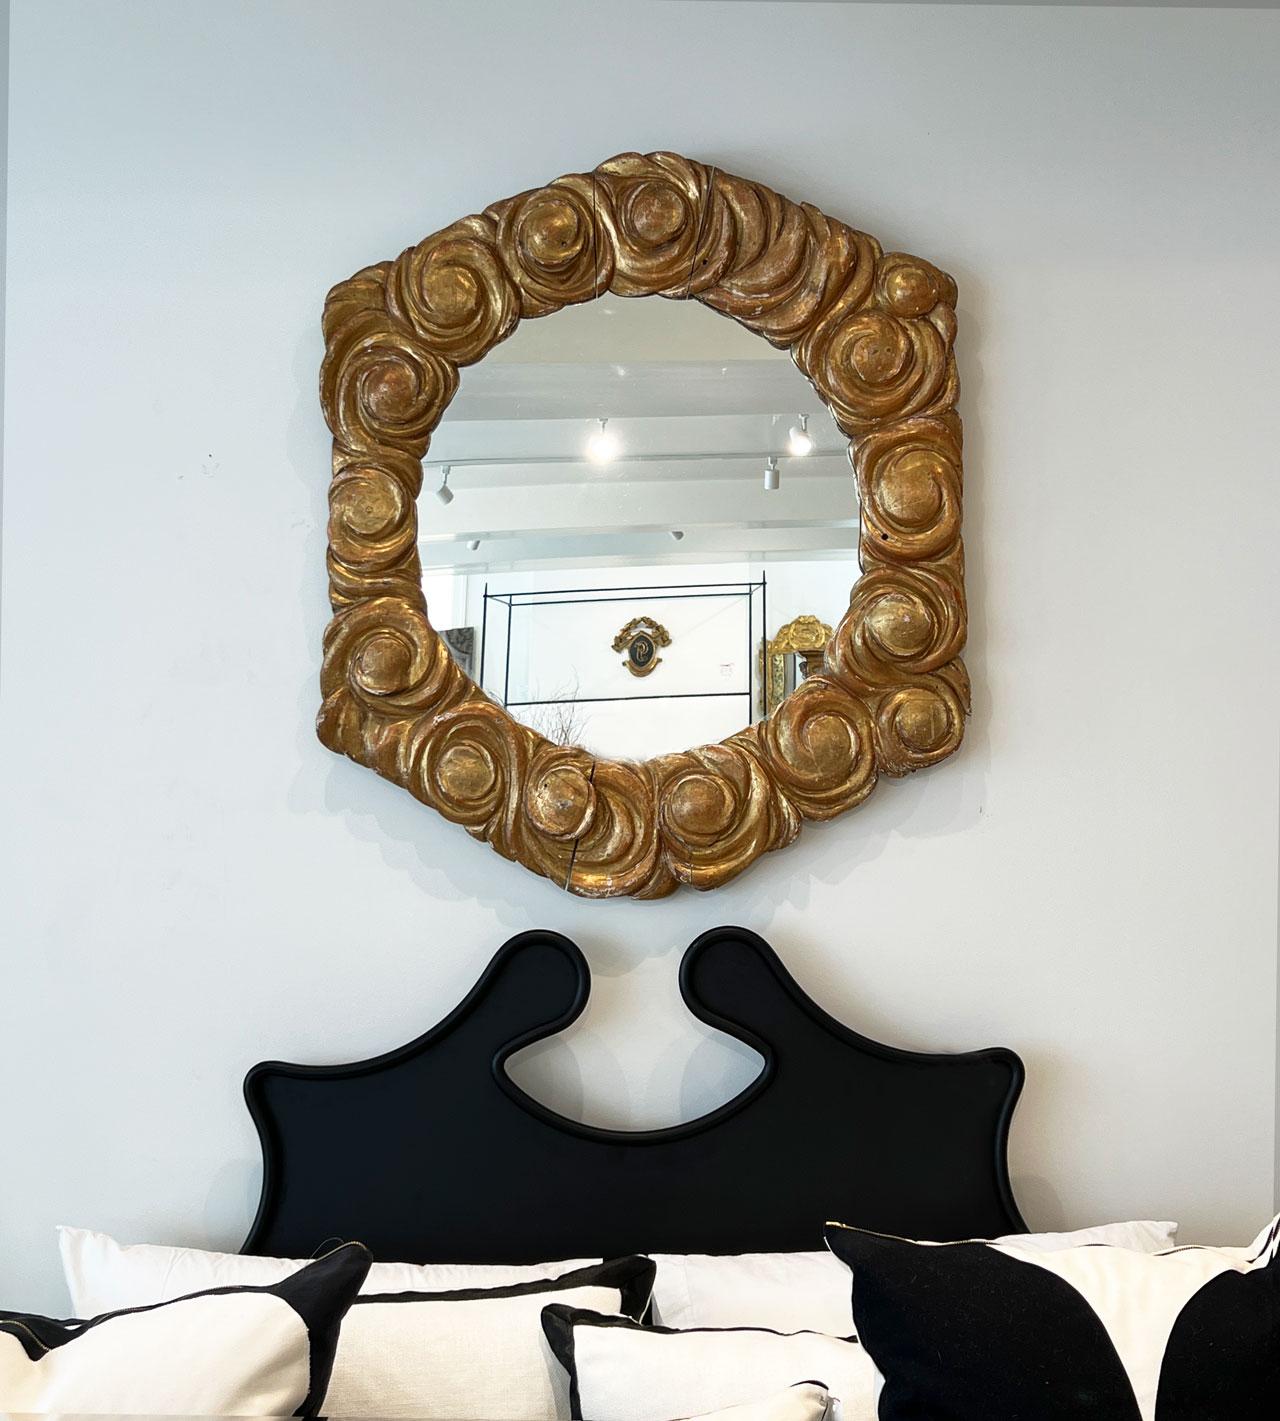 Statement mirror with cloud shapes surrounding a round mirror.